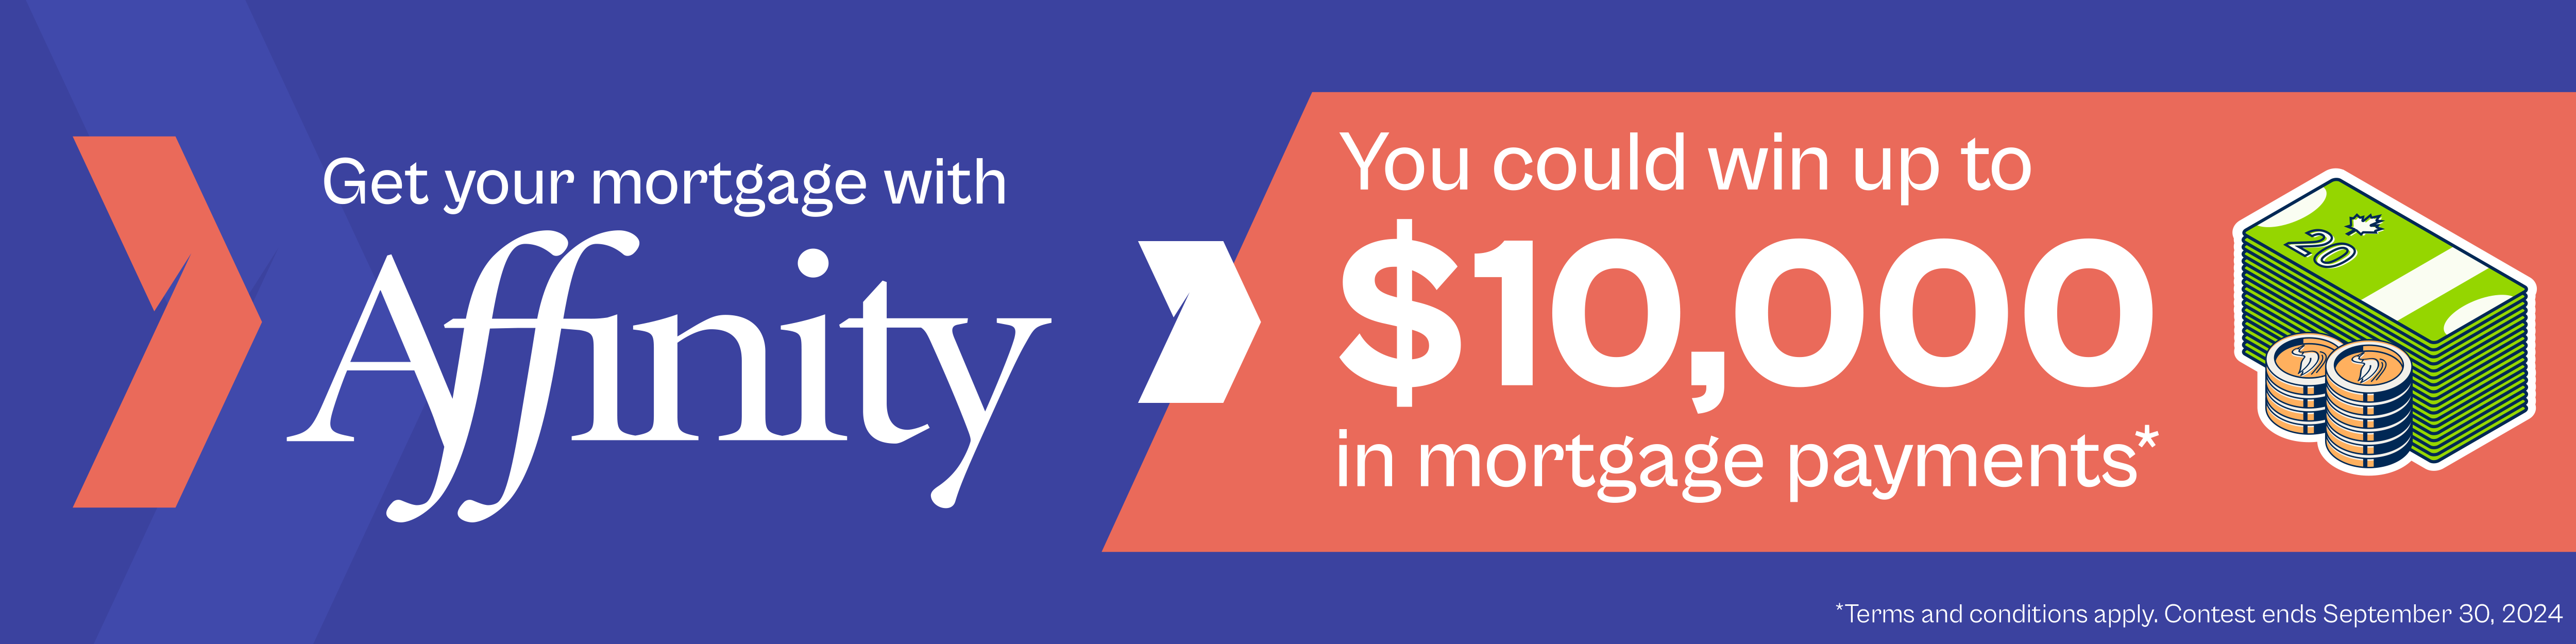 Get your mortgage with Affinity. You could win up to $10,000 in mortgage payments*. *Terms and conditions apply. Contest ends September 30, 2024.